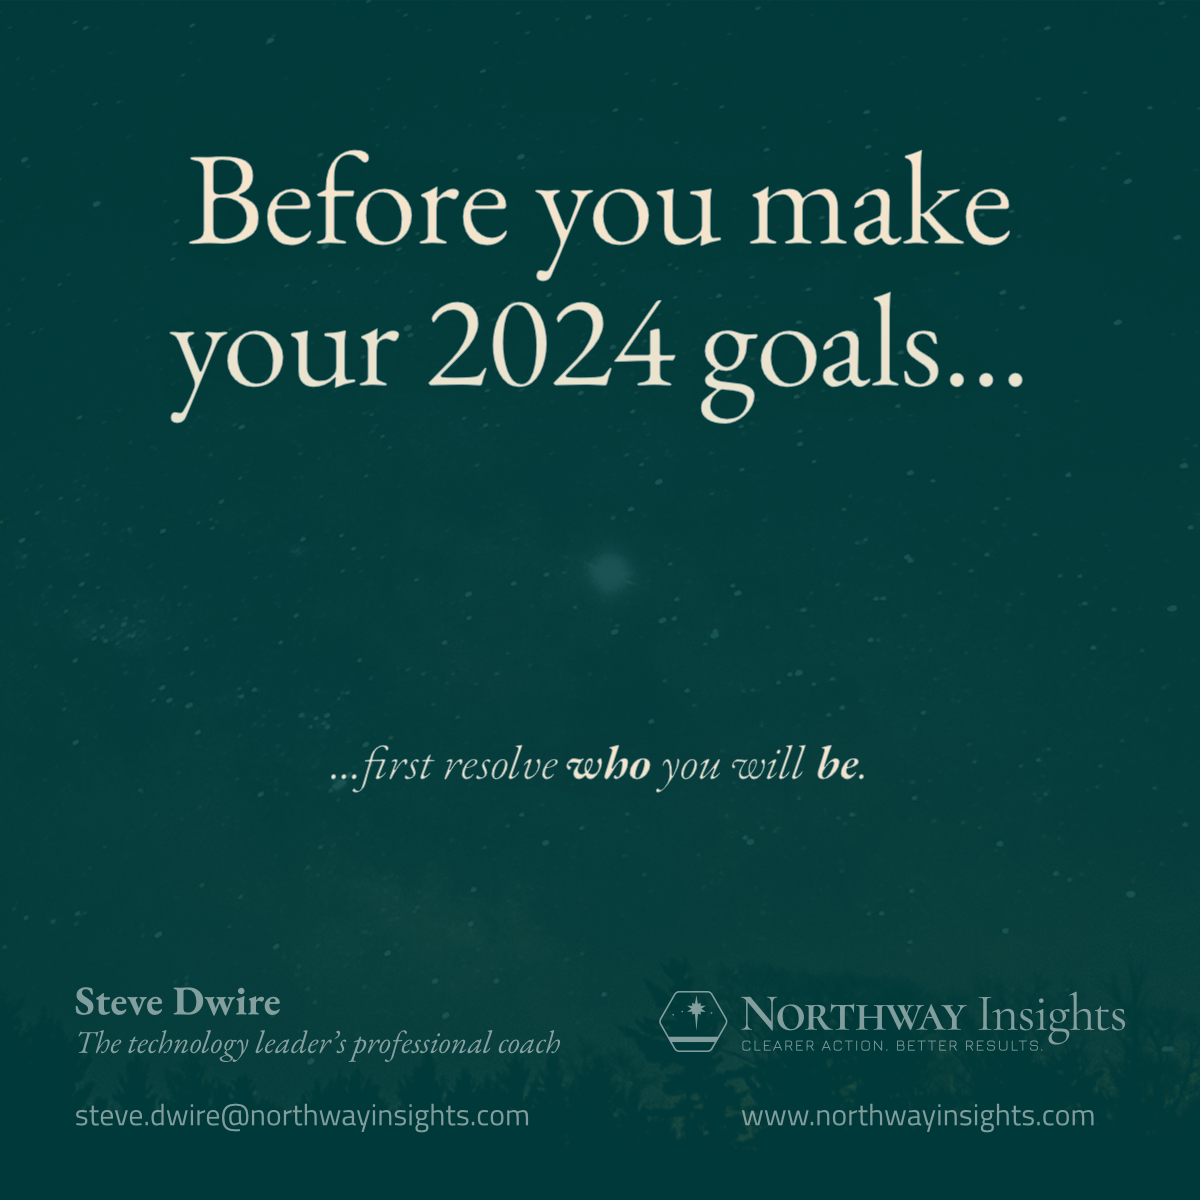 Before you make your 2024 goals…